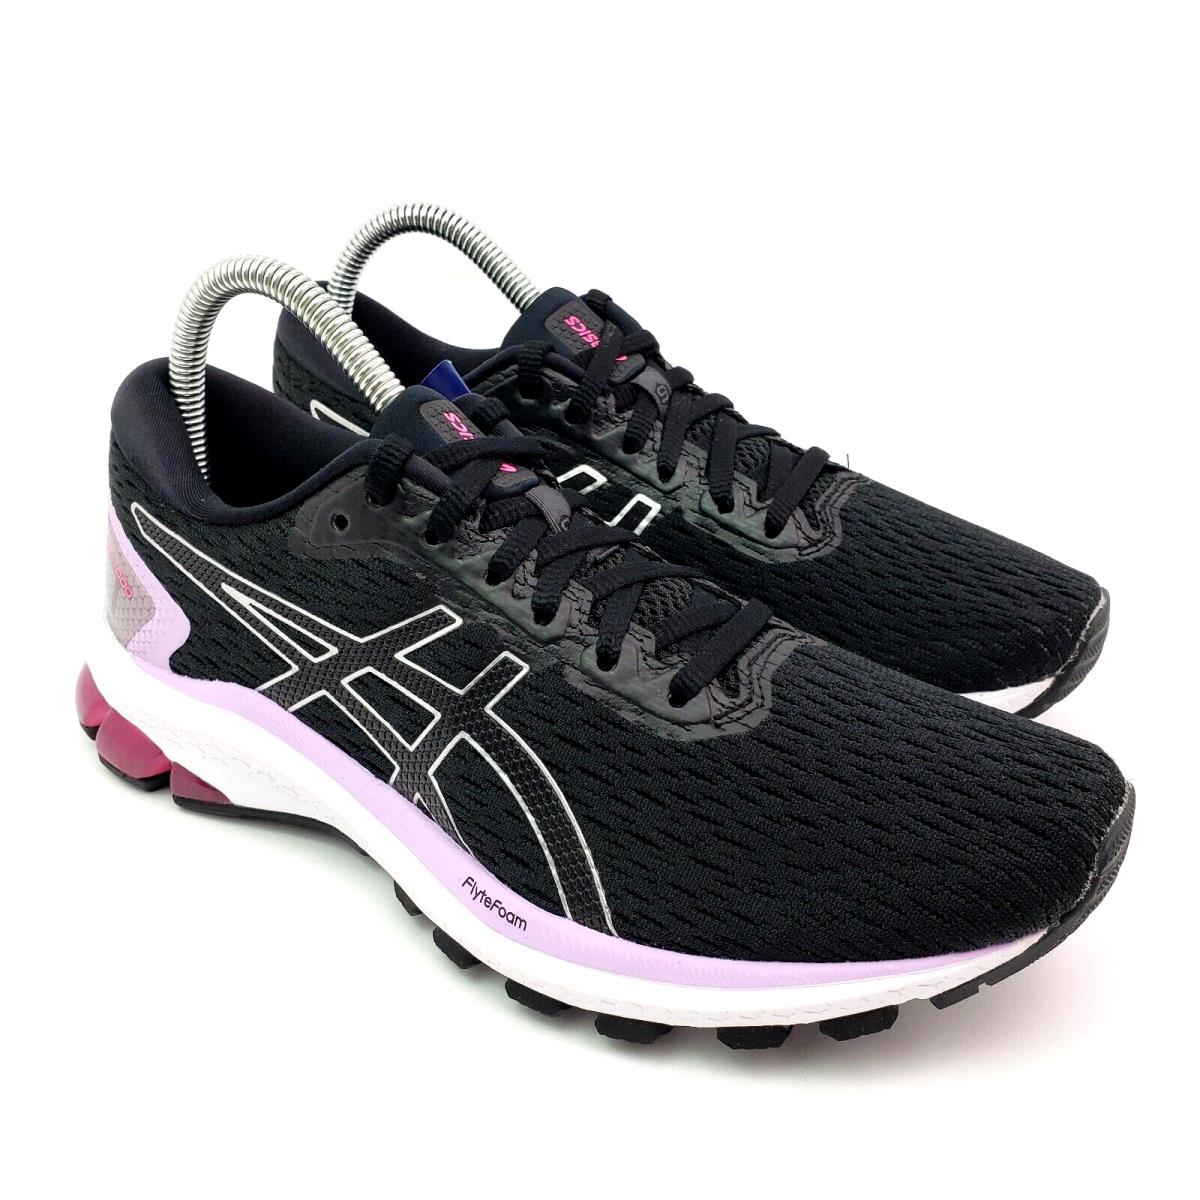 Asics GT-10000 9 Womens Size 8 Black Silver Running Sneaker Shoes 1012A651-002